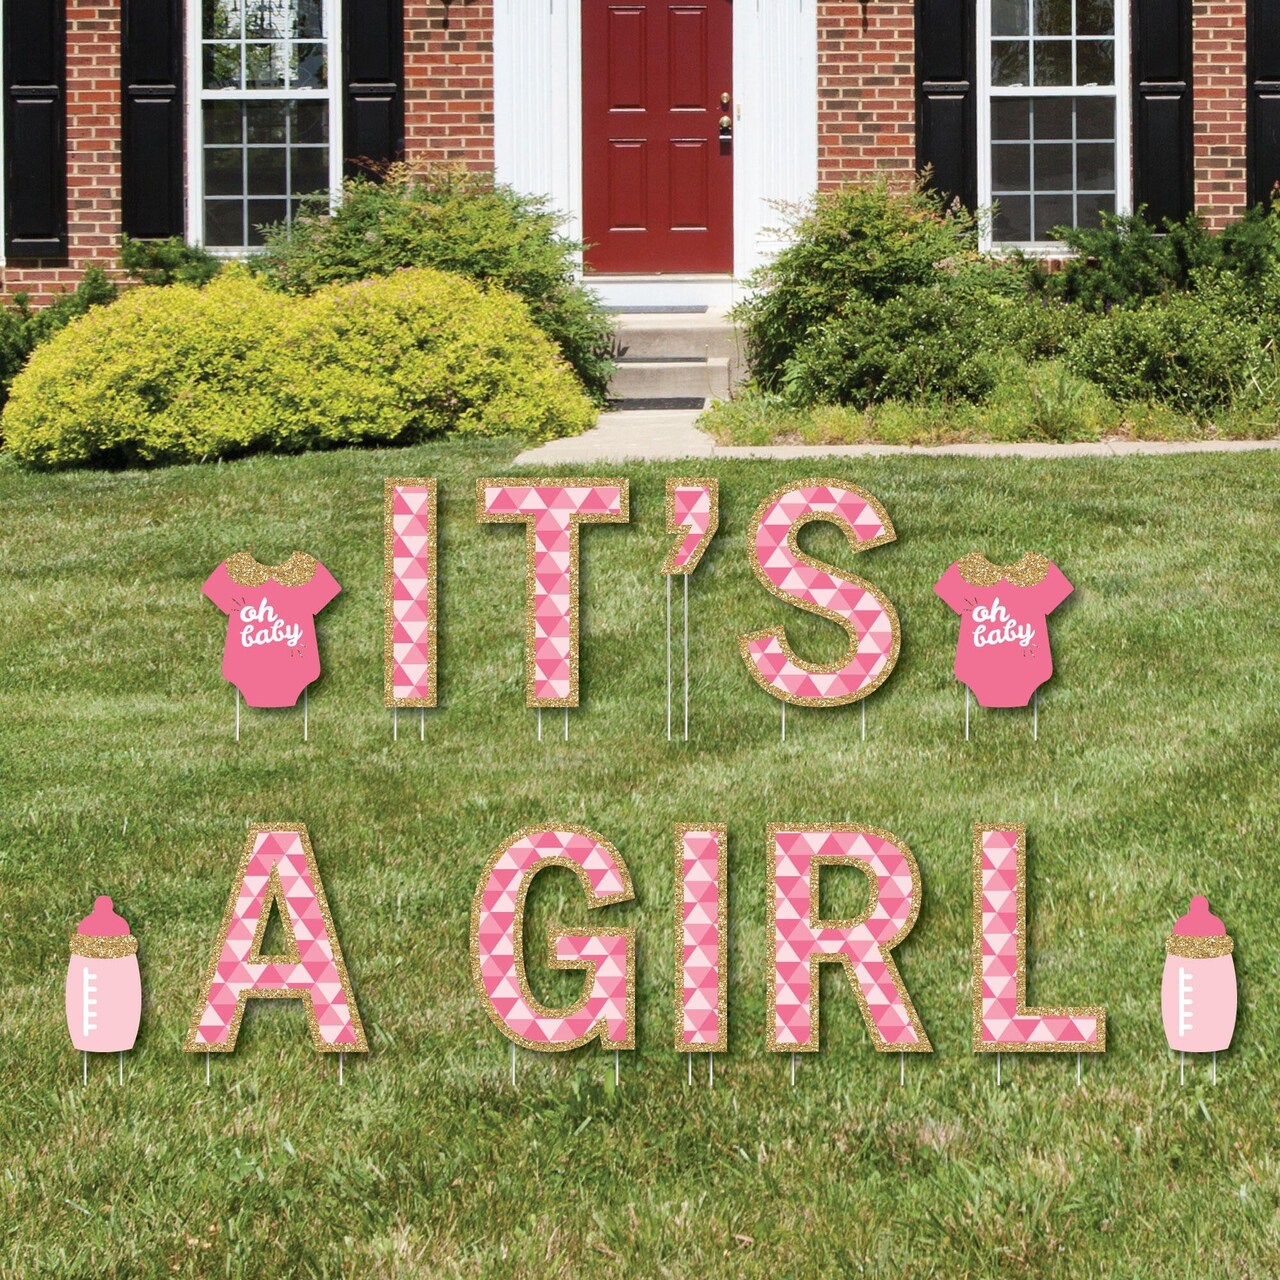 Big Dot of Happiness It&#x27;s A Girl - Yard Sign Outdoor Lawn Decorations - Girl Baby Shower and Baby Announcement Yard Signs